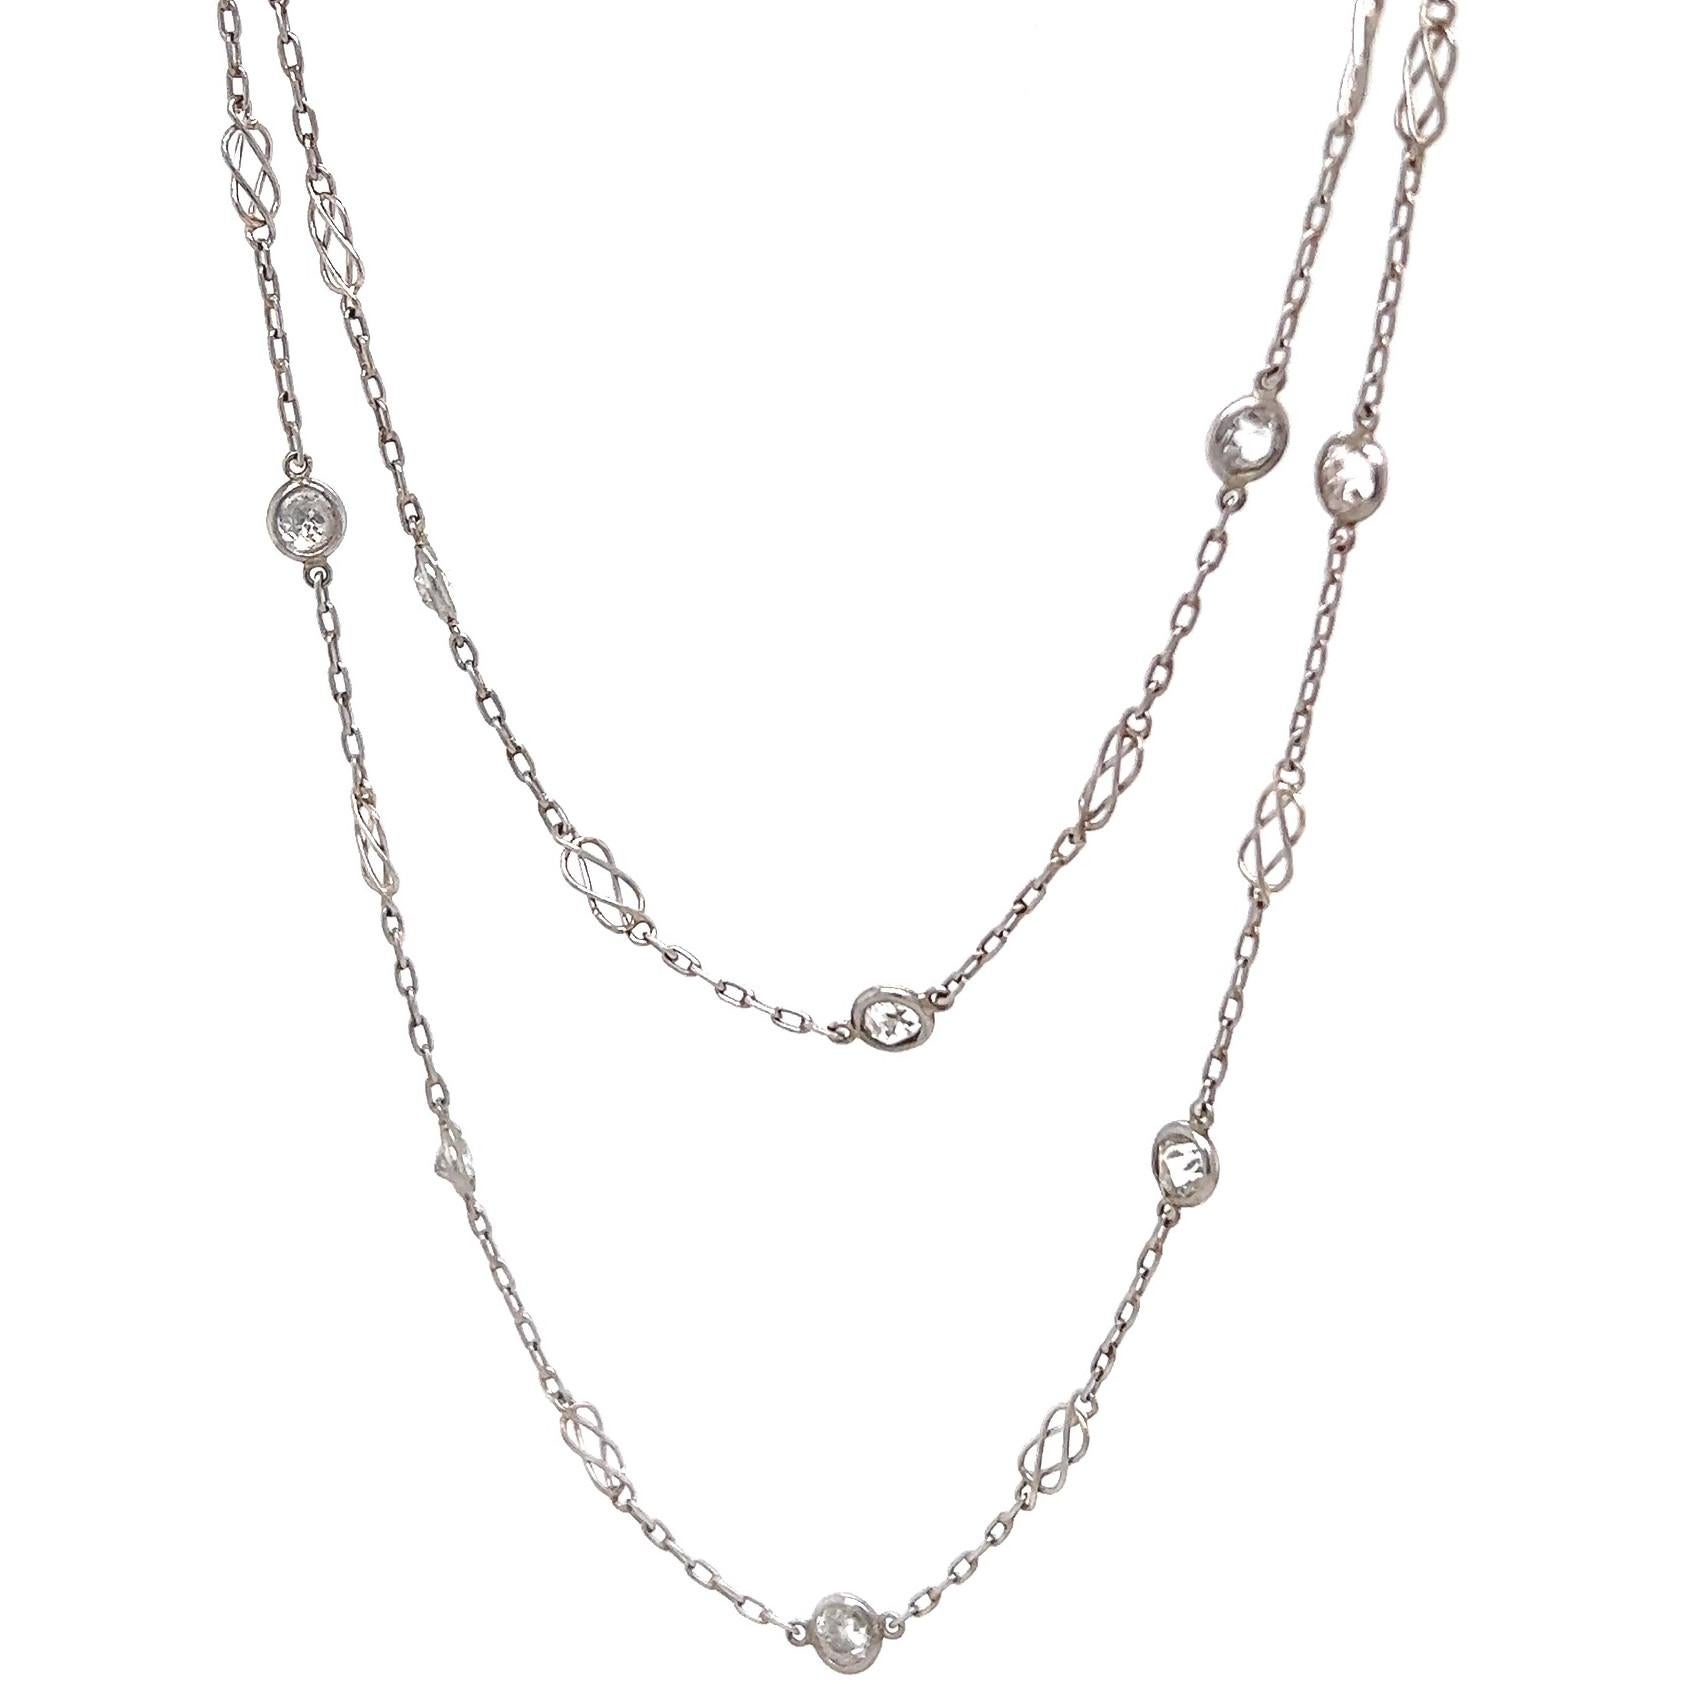 4.89 Carats Old European Cut Diamonds by the Yard Platinum Necklace For Sale 1